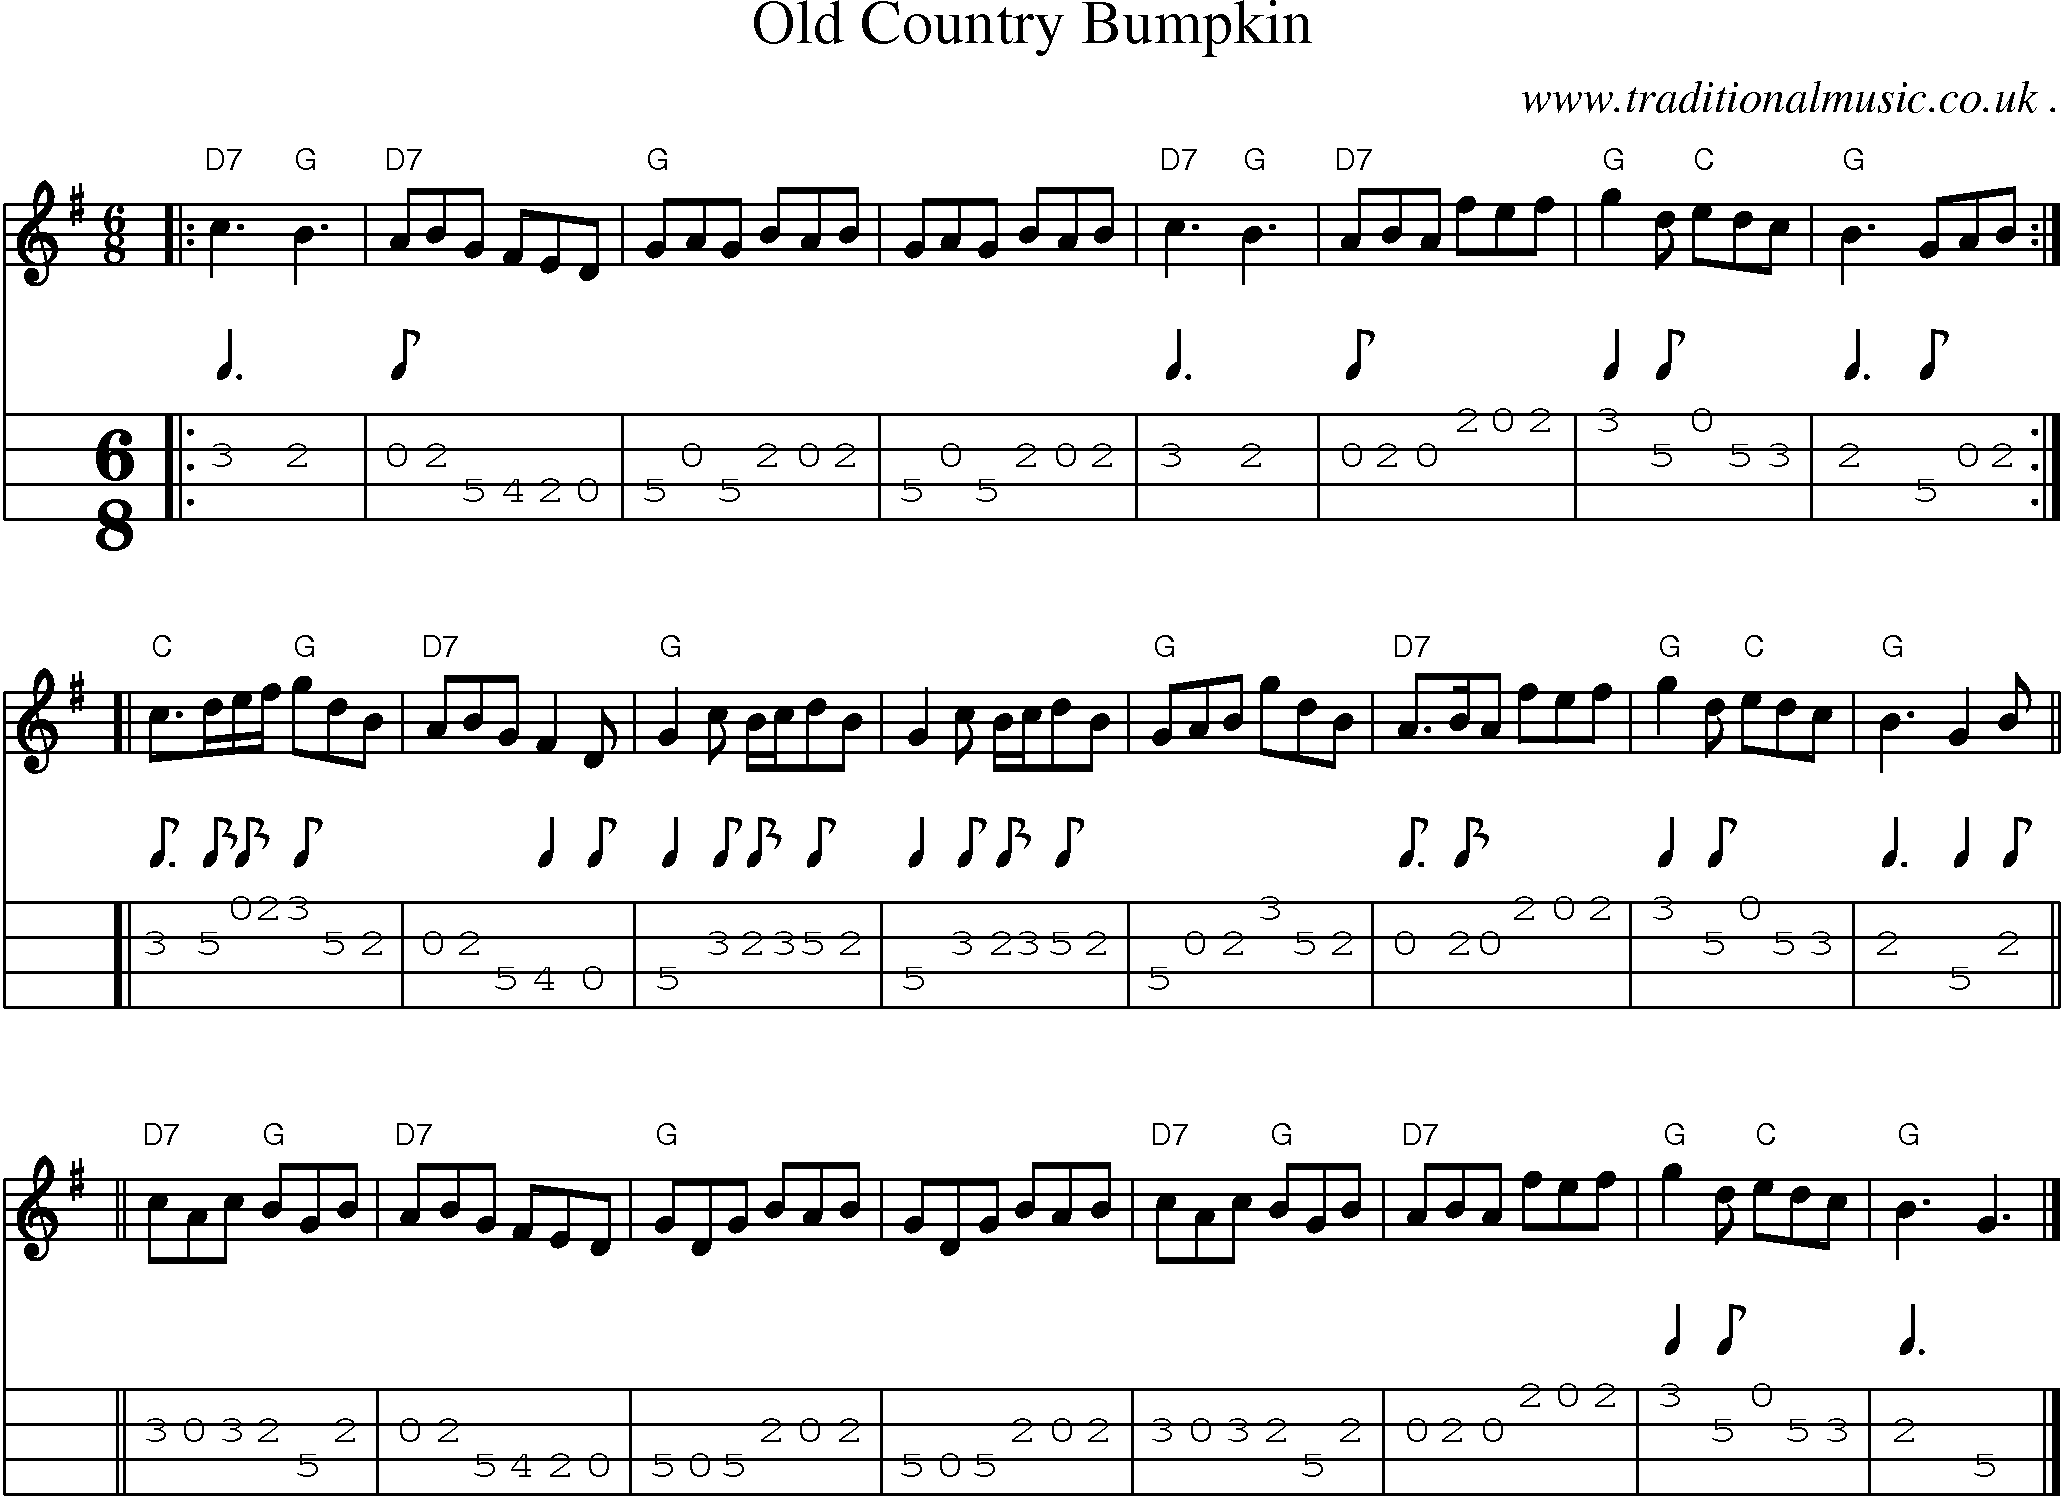 Sheet-music  score, Chords and Mandolin Tabs for Old Country Bumpkin